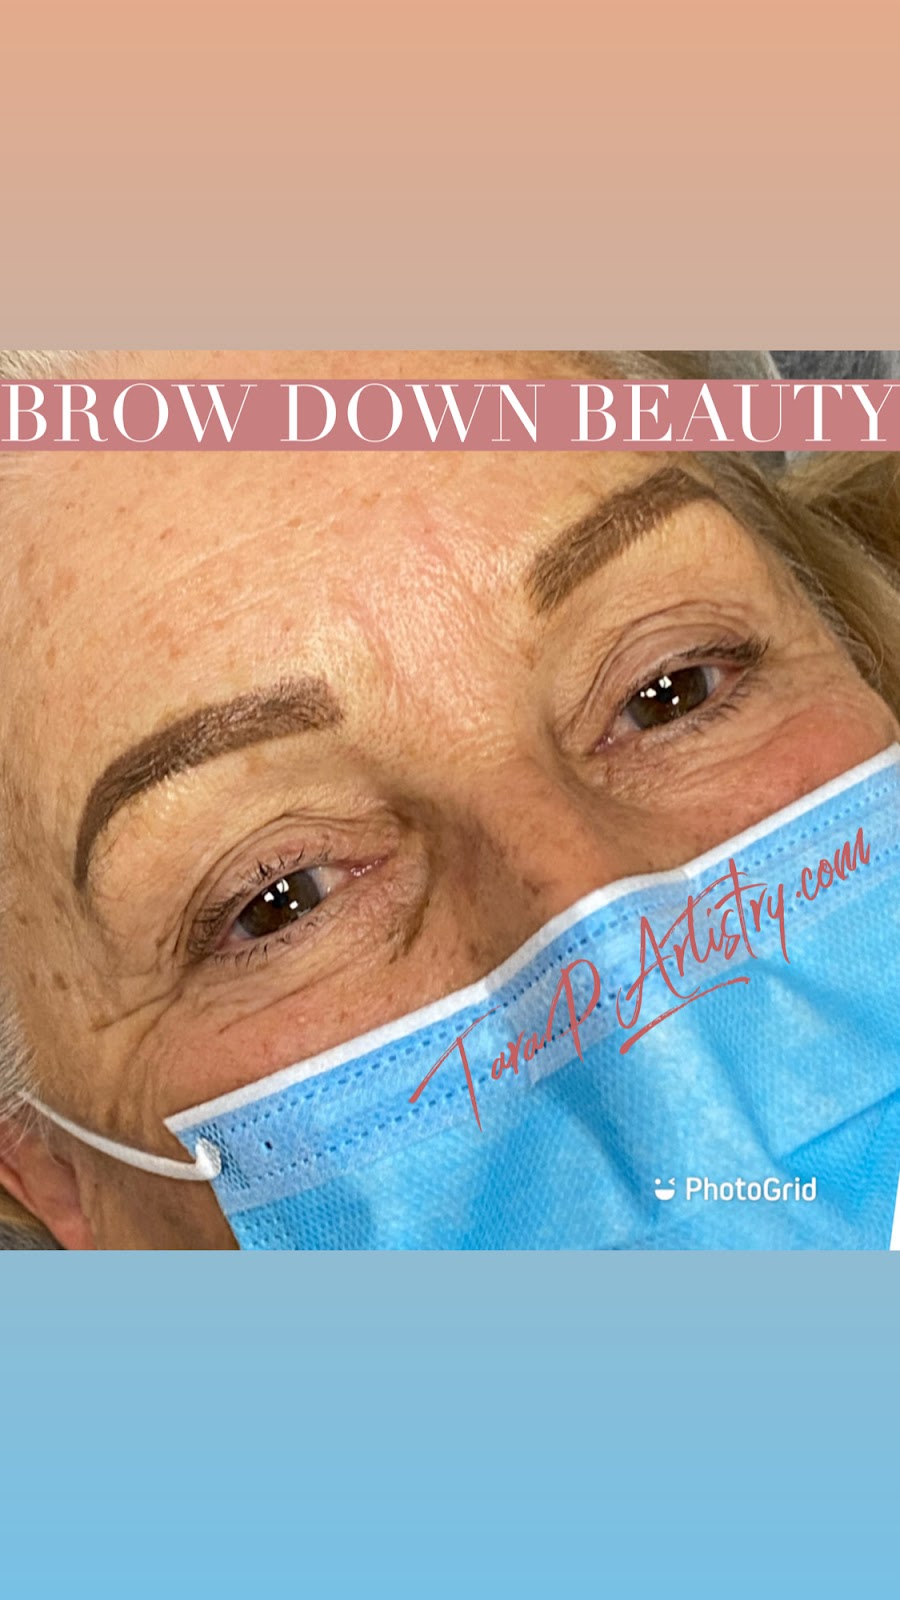 Brow Down Beauty LLC Microblading and Permanent Cosmetics | 41 N Scott St, Carbondale, PA 18407 | Phone: (570) 499-0015